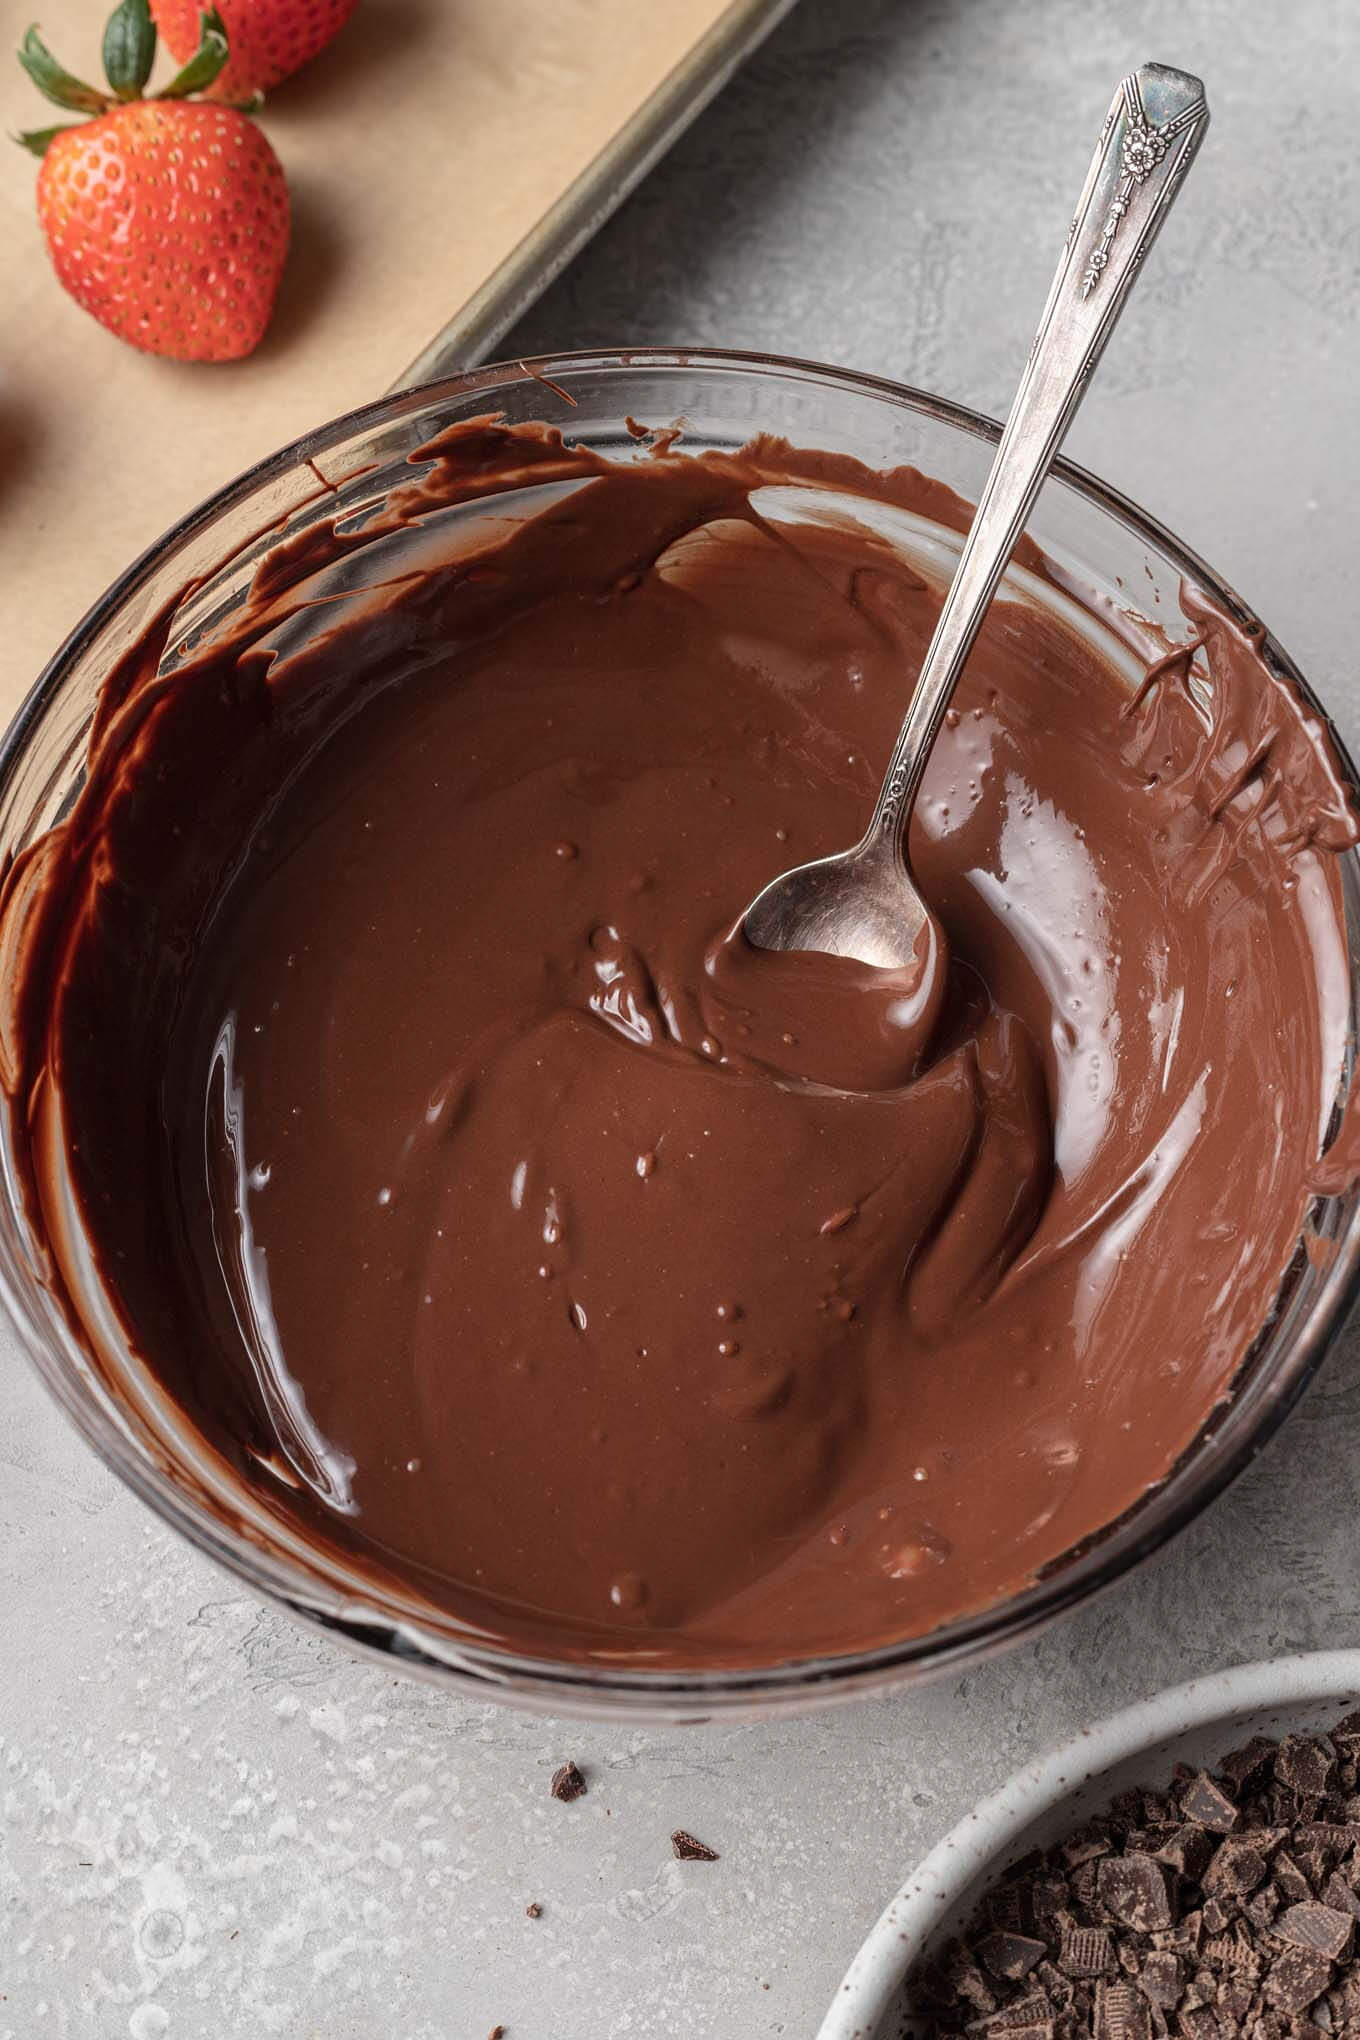 A glass mixing bowl containing tempered chocolate.